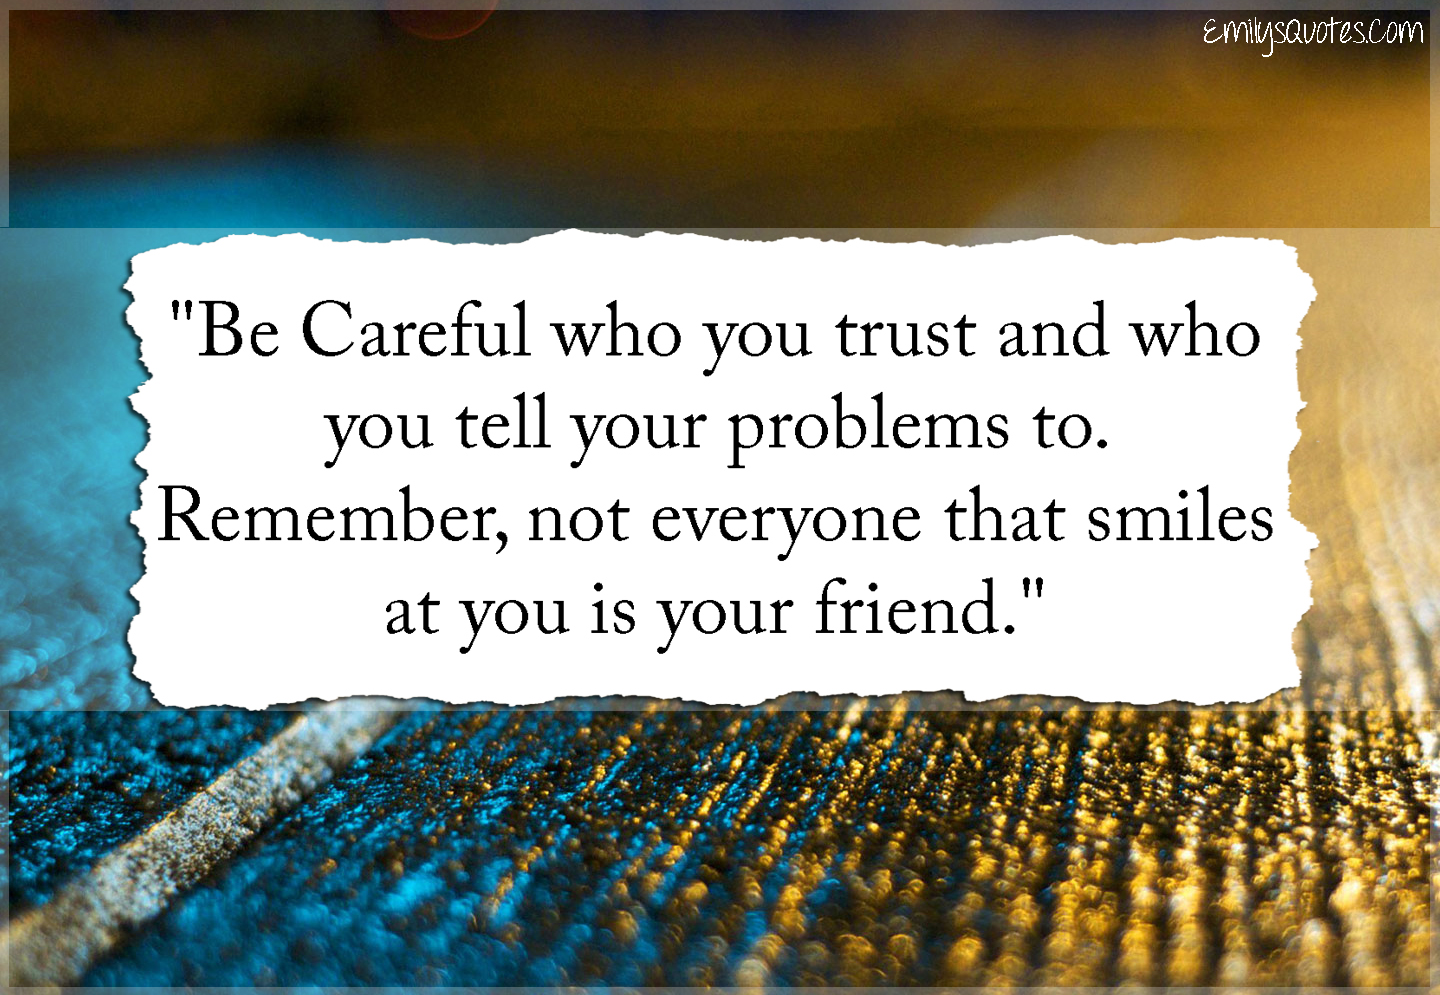 Be Careful who you trust and who you tell your problems to